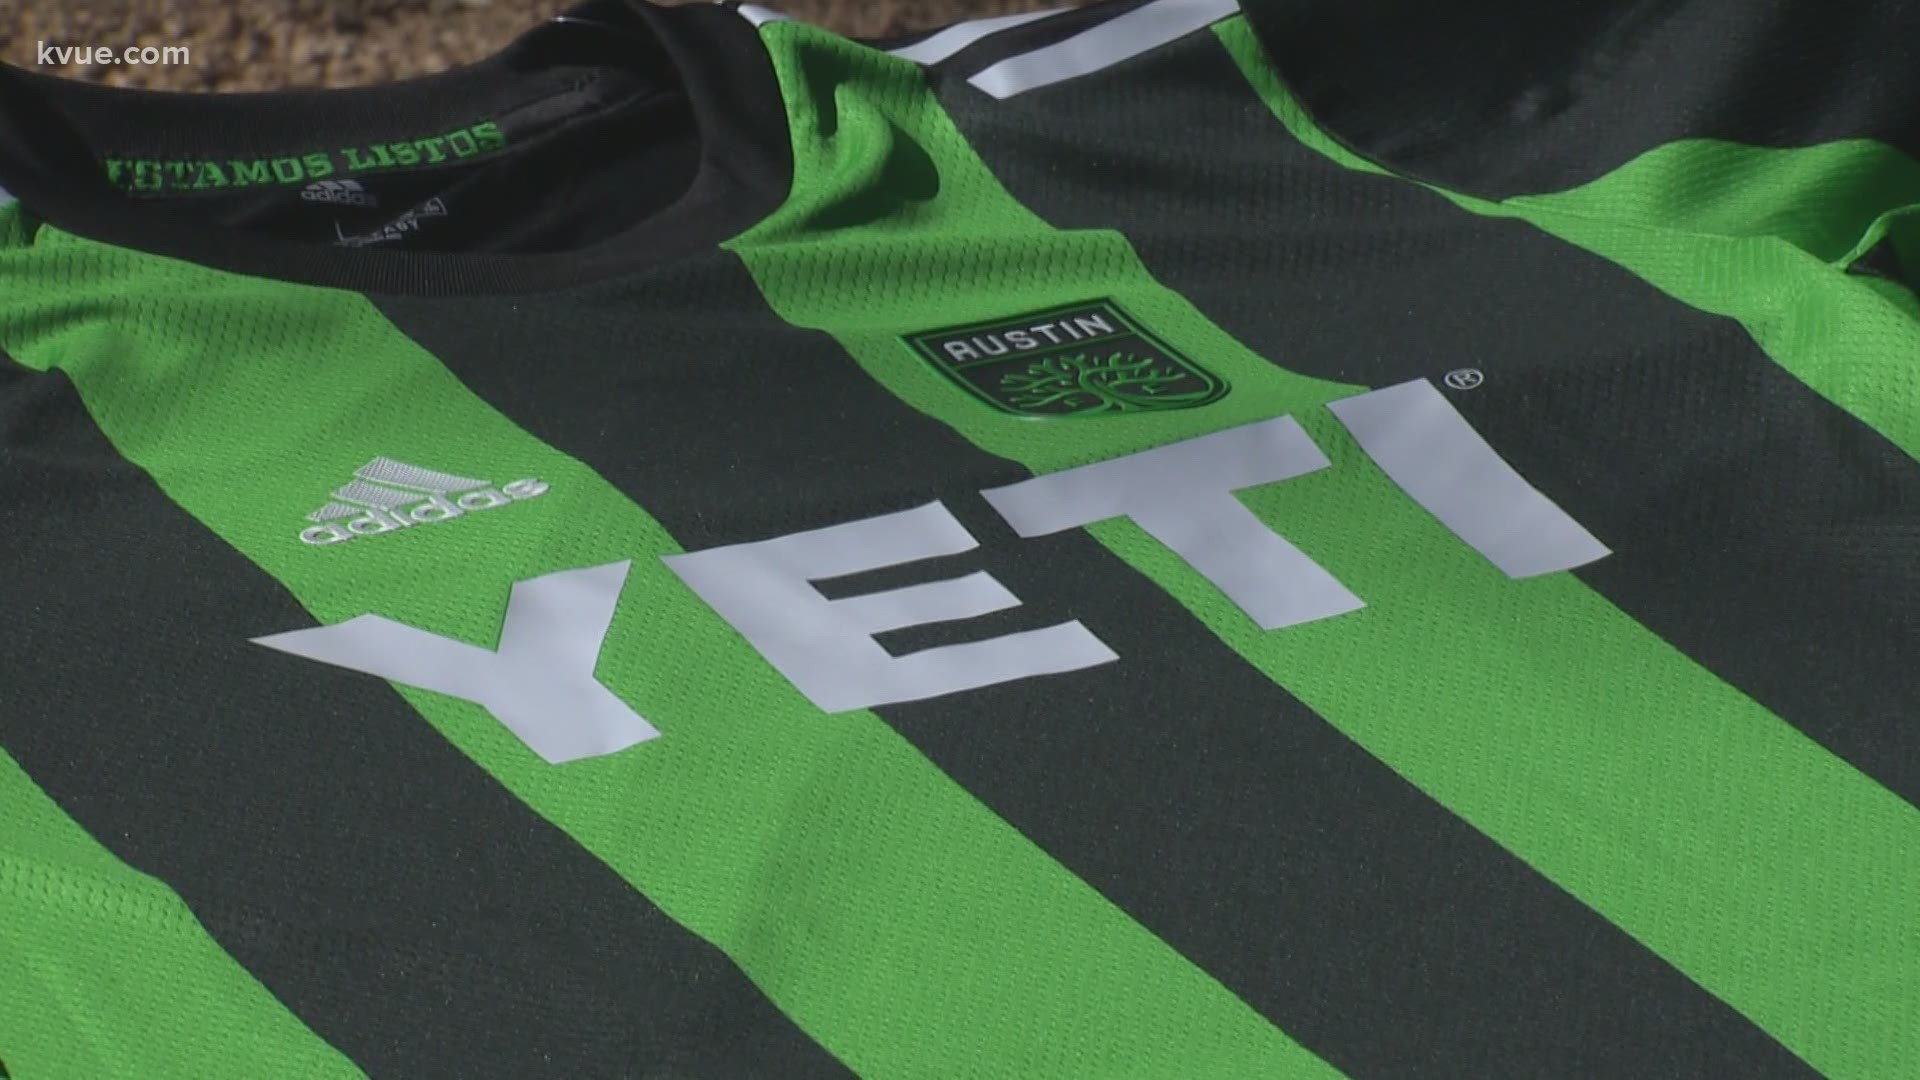 Months of thought and effort went into the design of Austin FC's jerseys.